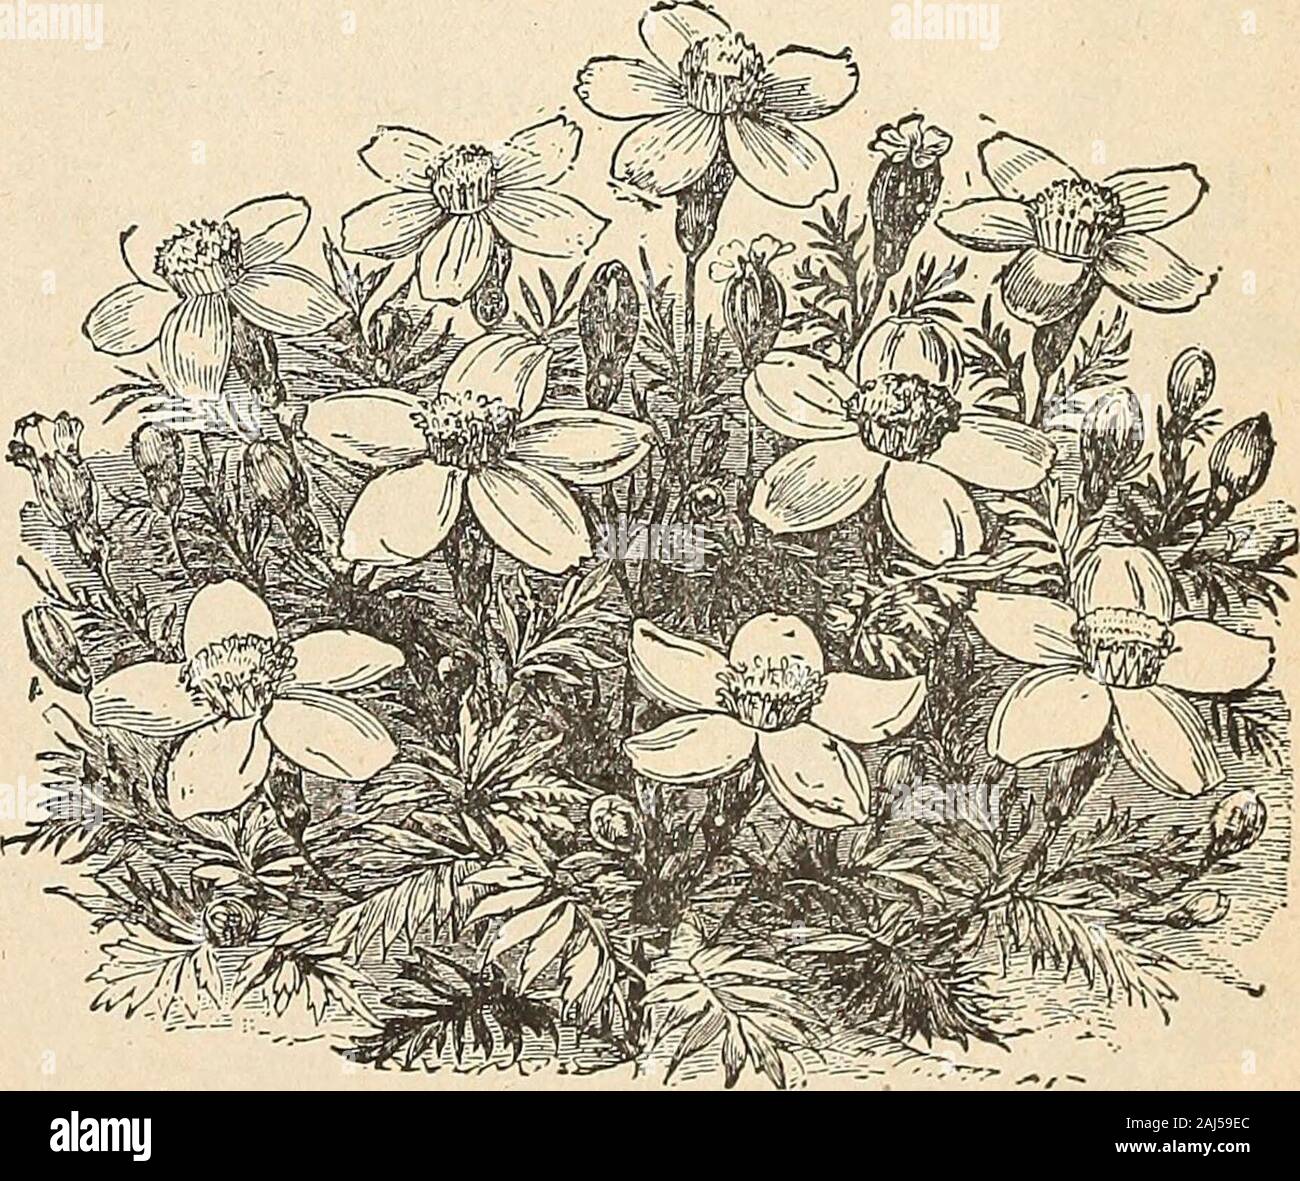 Horitucultural guide : spring 1892 . s 5 Yellow Winged—Same habit as Scarlet Winged , 5 SCABIOSA—Mourning Bride, or Sweet Scabious. Very desirable plants, producing pretty flowers of many colors In great pro-fusion. Good for cutting for vases, etc. II. A. Dwarf Double—Flowers very double and globular 5 Stellata—Starry seed vessels; good for winter bouquets 5 SWEET WILLIAM-Dianthus Barbatus, Exceedingly beautiful and showy plants, producing an abundance of rich-colored flowers throughout the season. H. P. Auricula Flowered—The flowers of this variety are very large and beauti-ful 5 Fine Single Stock Photo